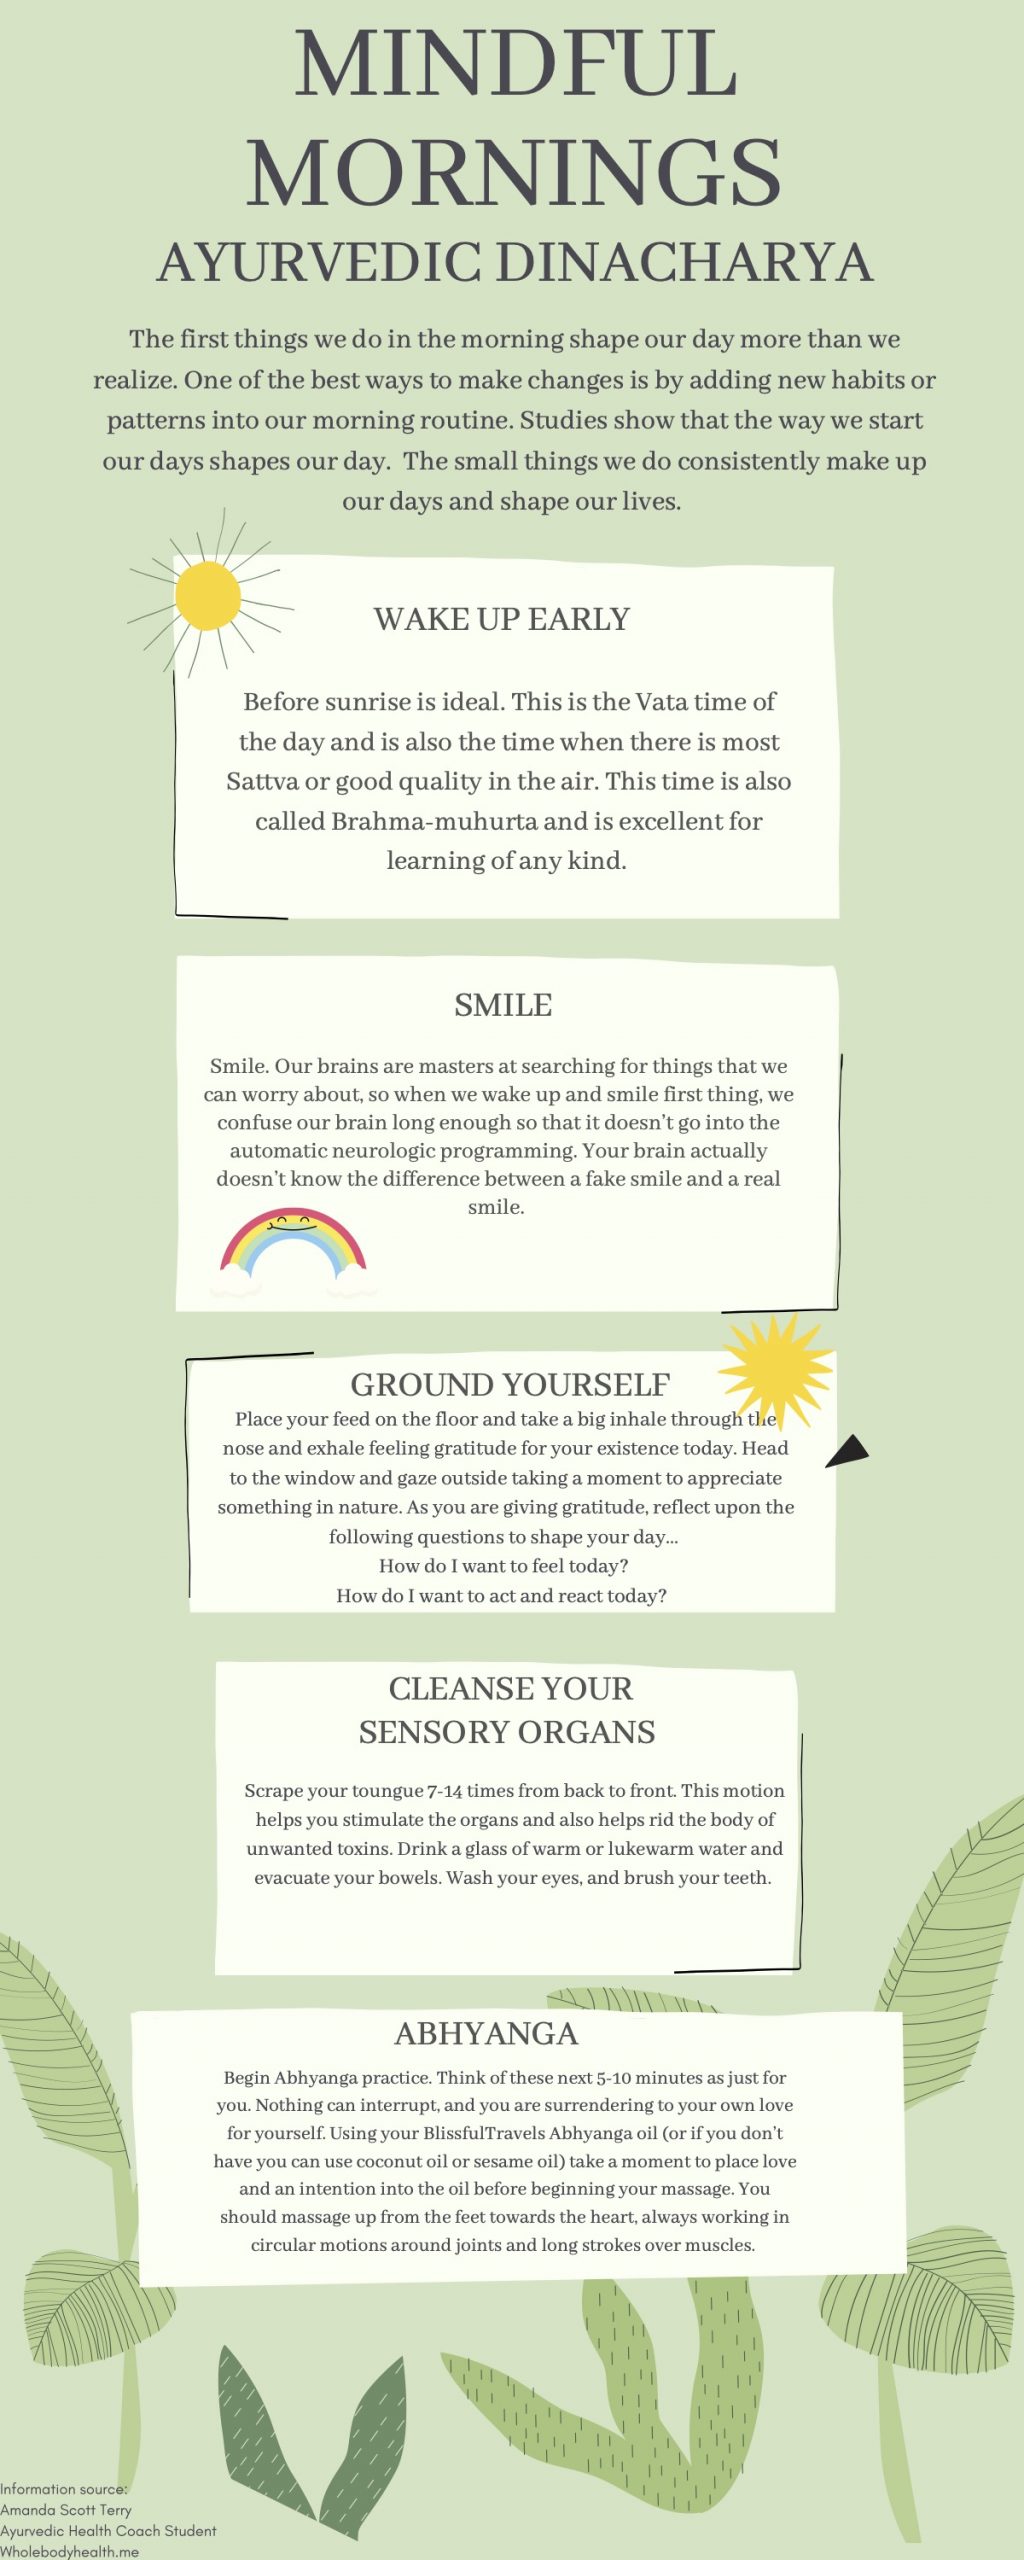 Mindful morning practice graphic